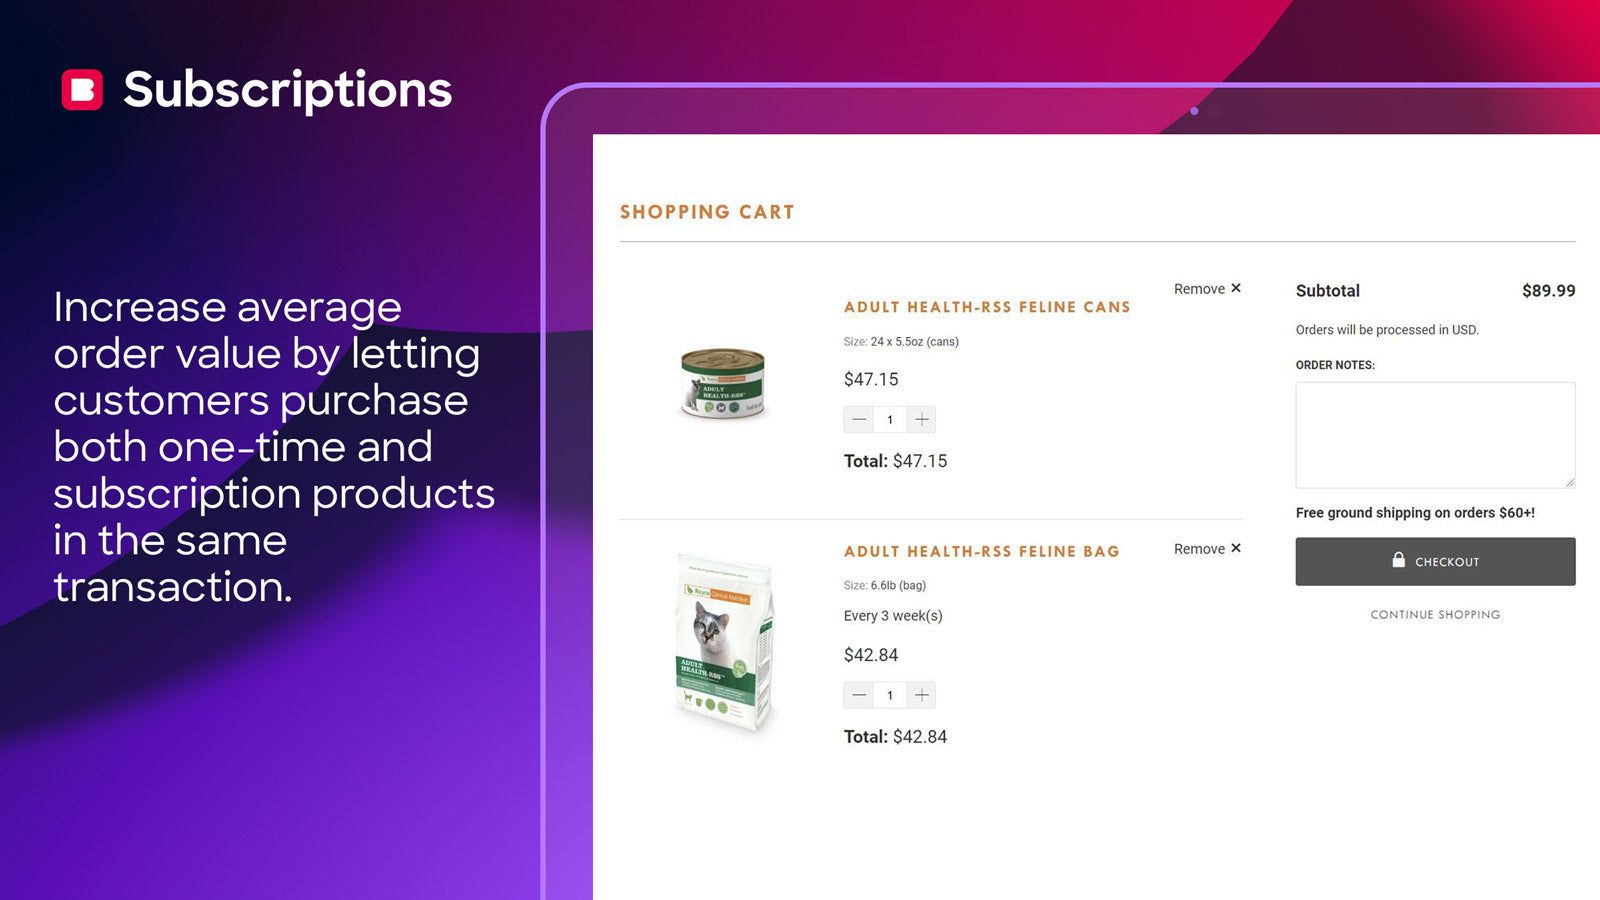 Add one-time and subscription products in the same transaction.